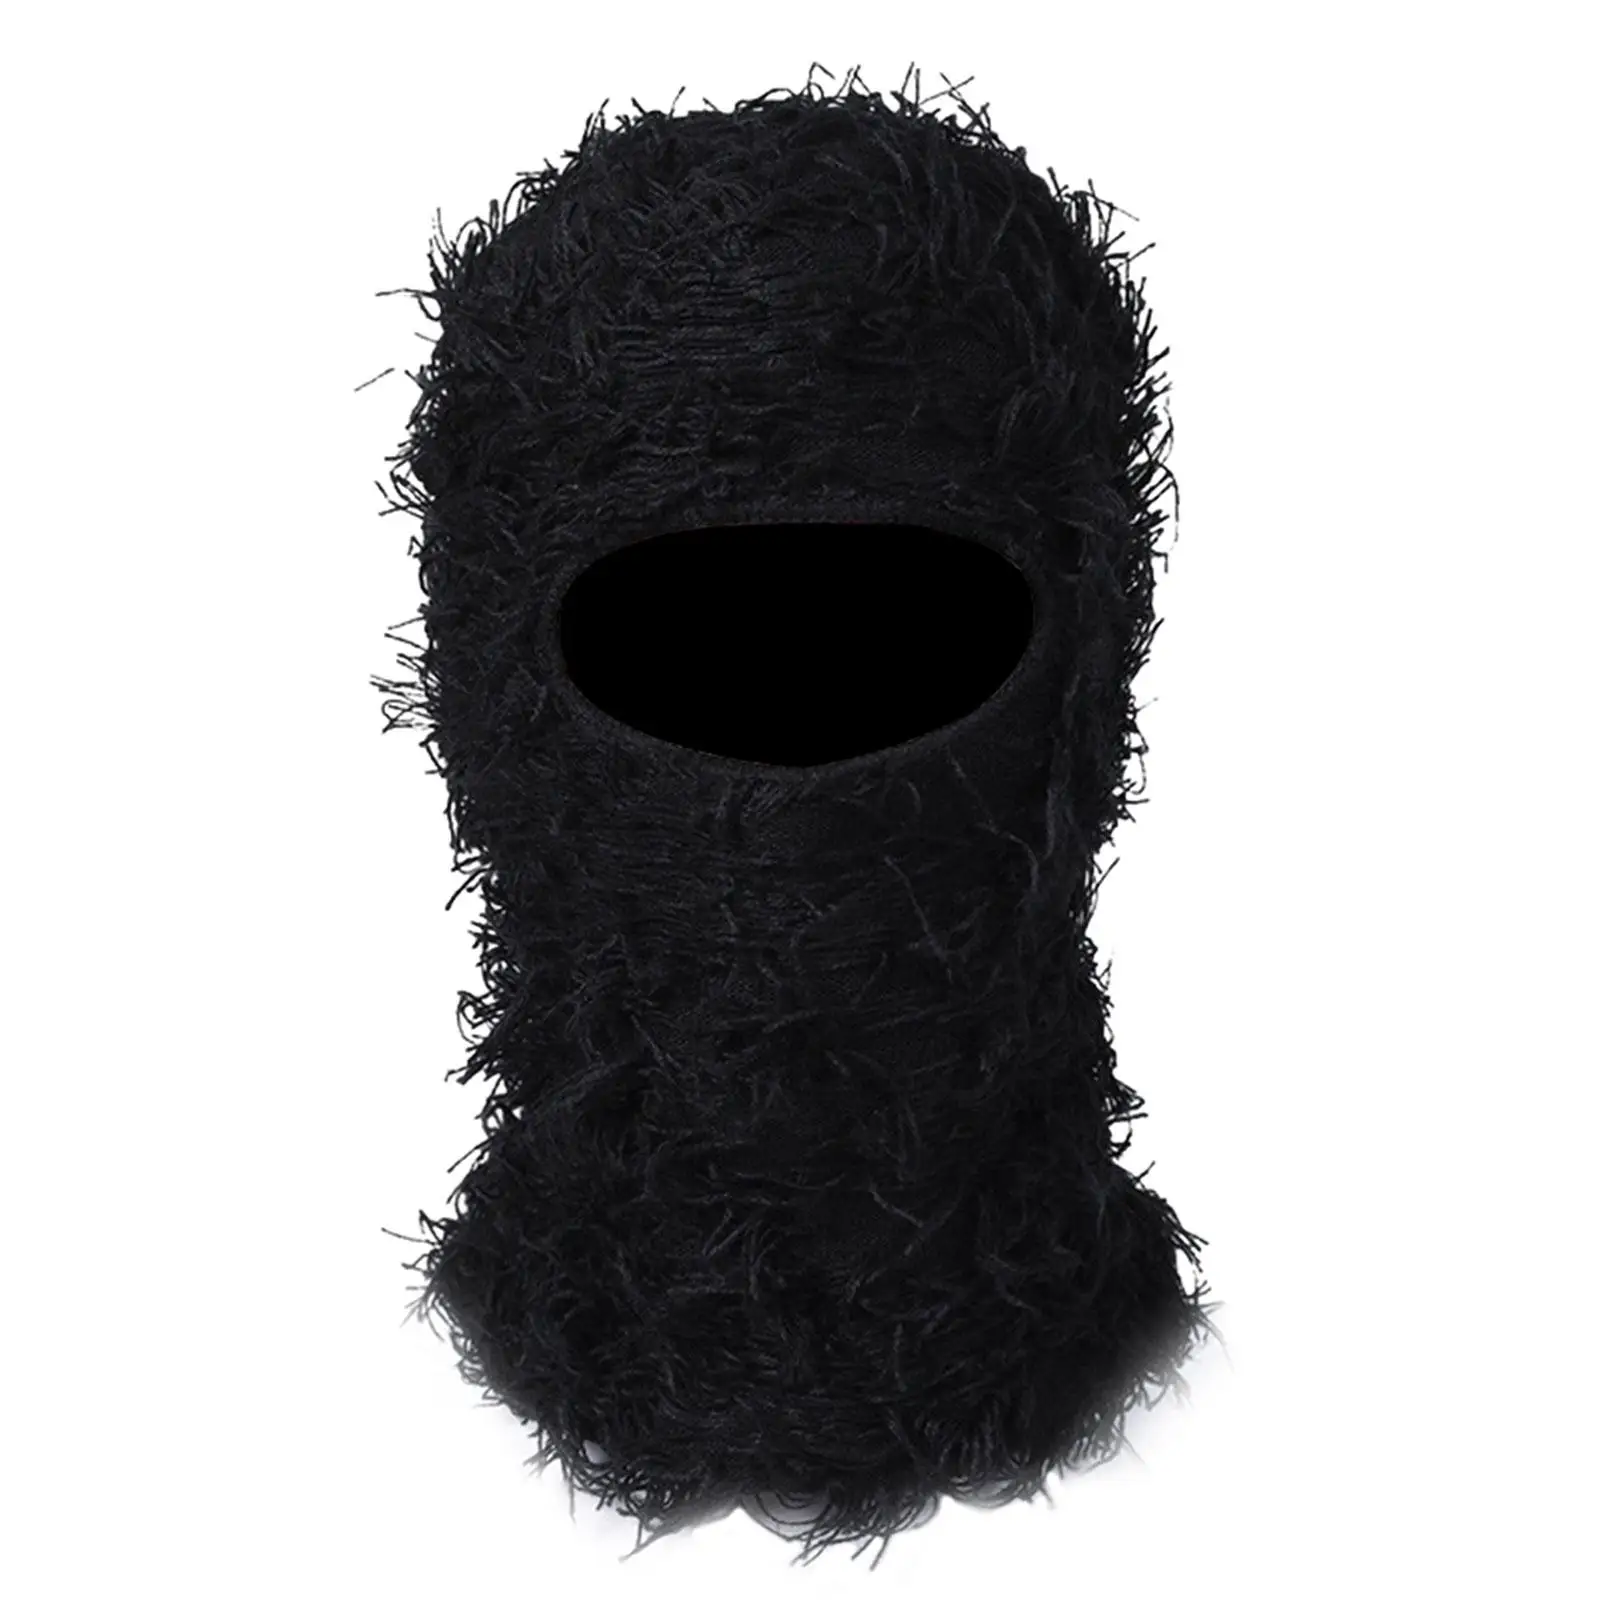 Balaclava Face Hat Biking Neck Warmer, Warm Neck Protection, Ski Face Cover, Full Face Hat for Outdoor Activities Climbing